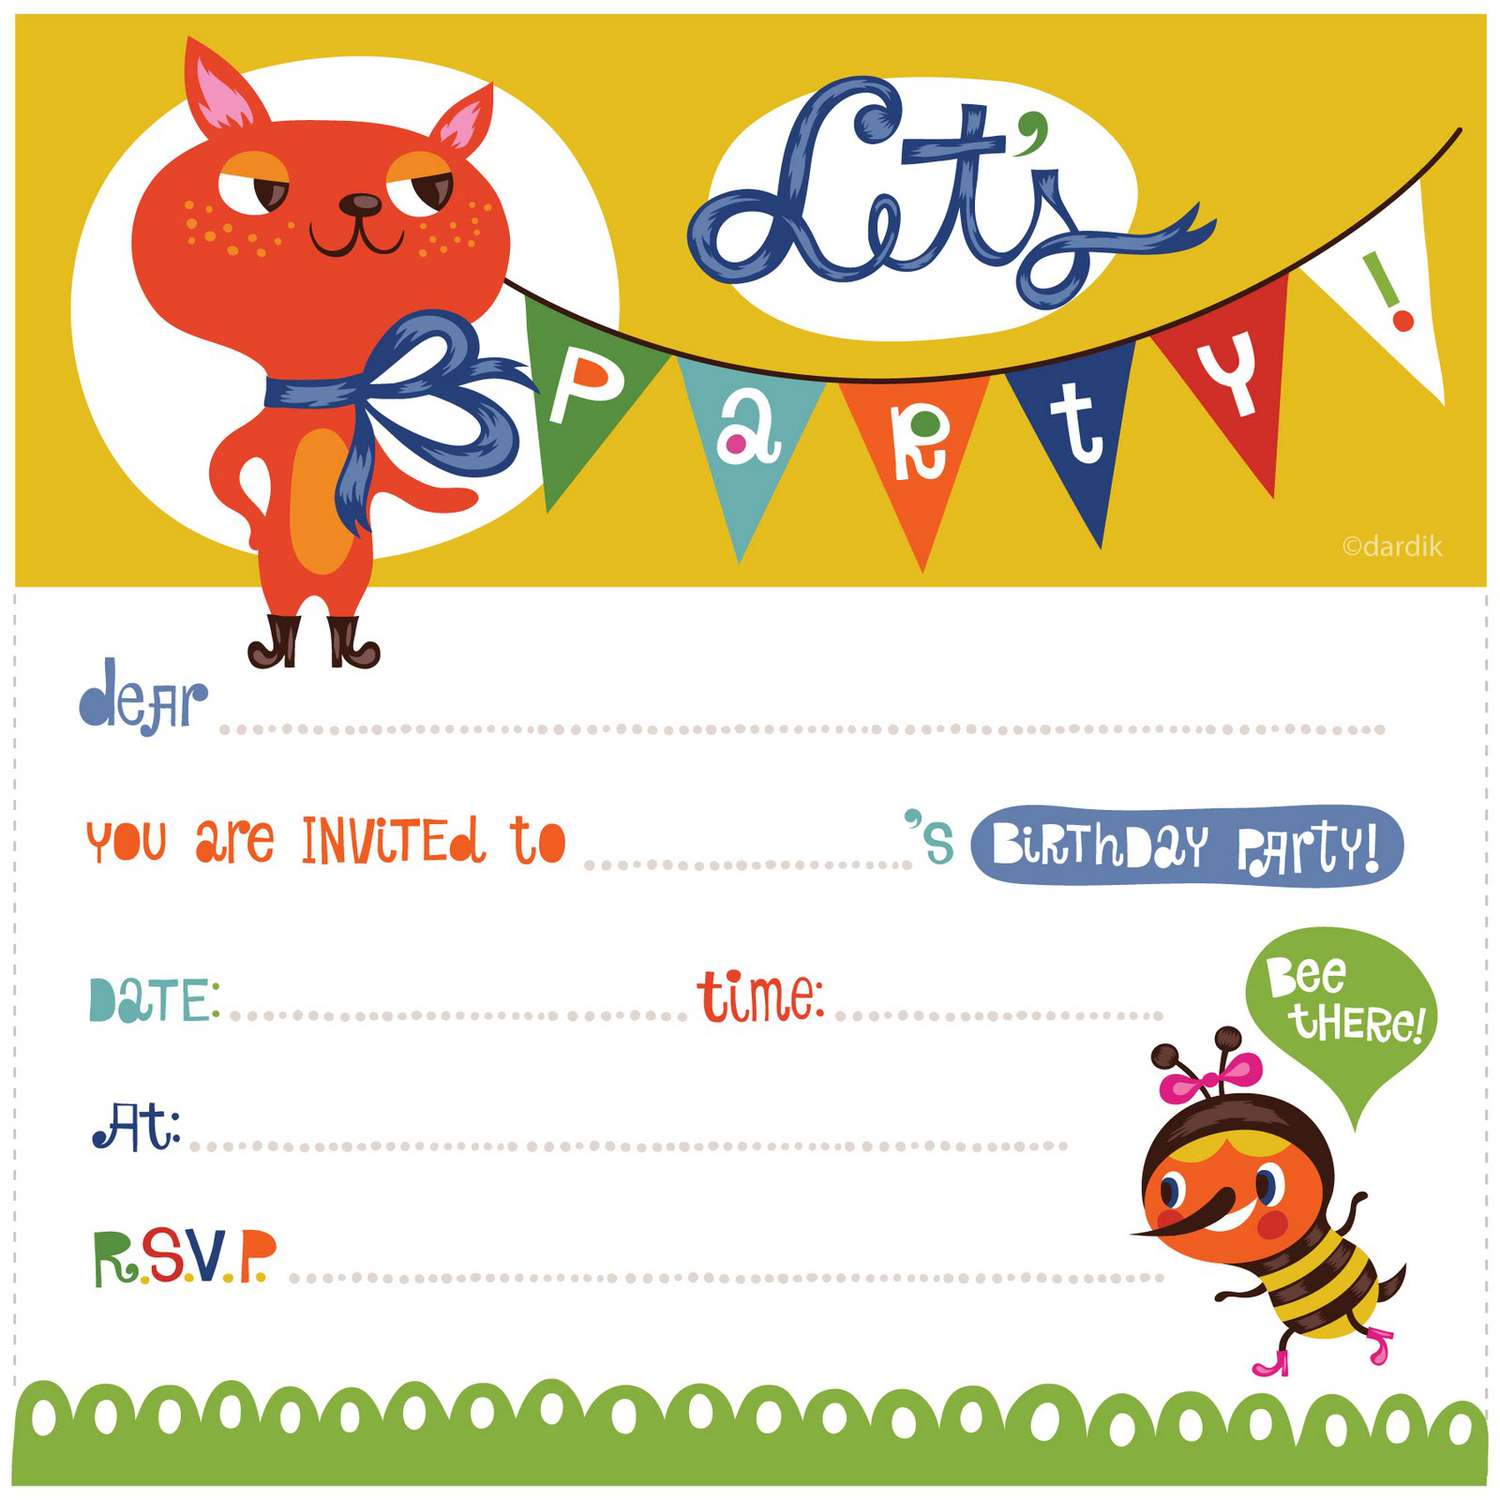 A "Let's Party" birthday invite with a bee and cat.